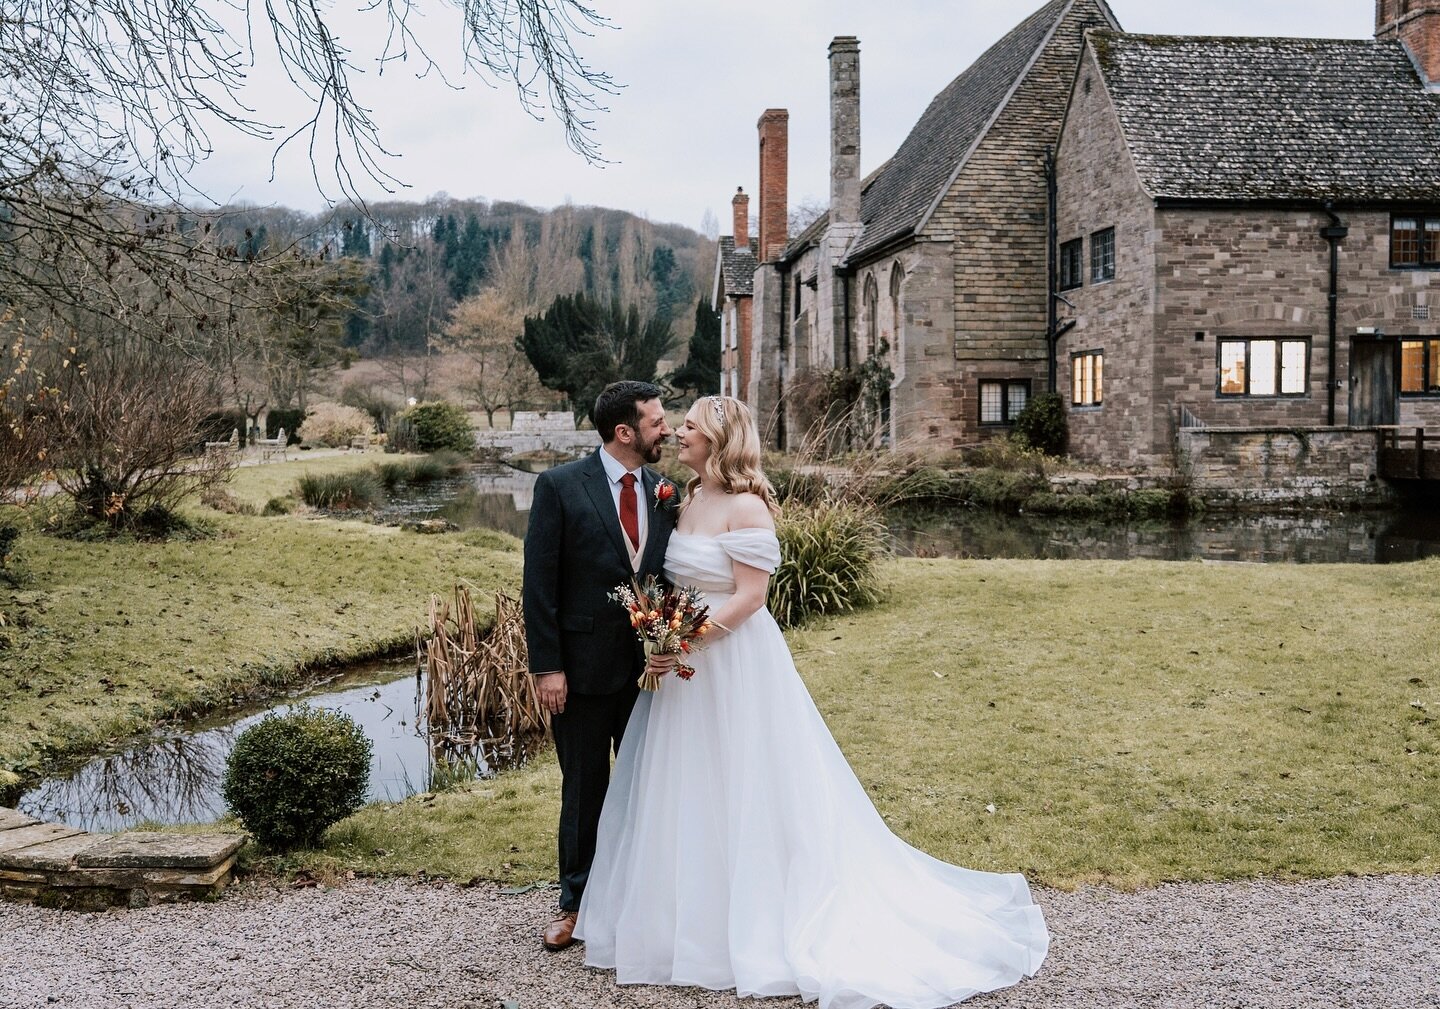 Hope and Matt had a such a beautiful day surrounded by friends and family at @brinsopcourt 😍 

Hair: @michellehavard.hair 
Makeup: @anastassia.mua 
Venue: @brinsopcourt 
Celebrant: @juliahawkescelebrant 
☺️